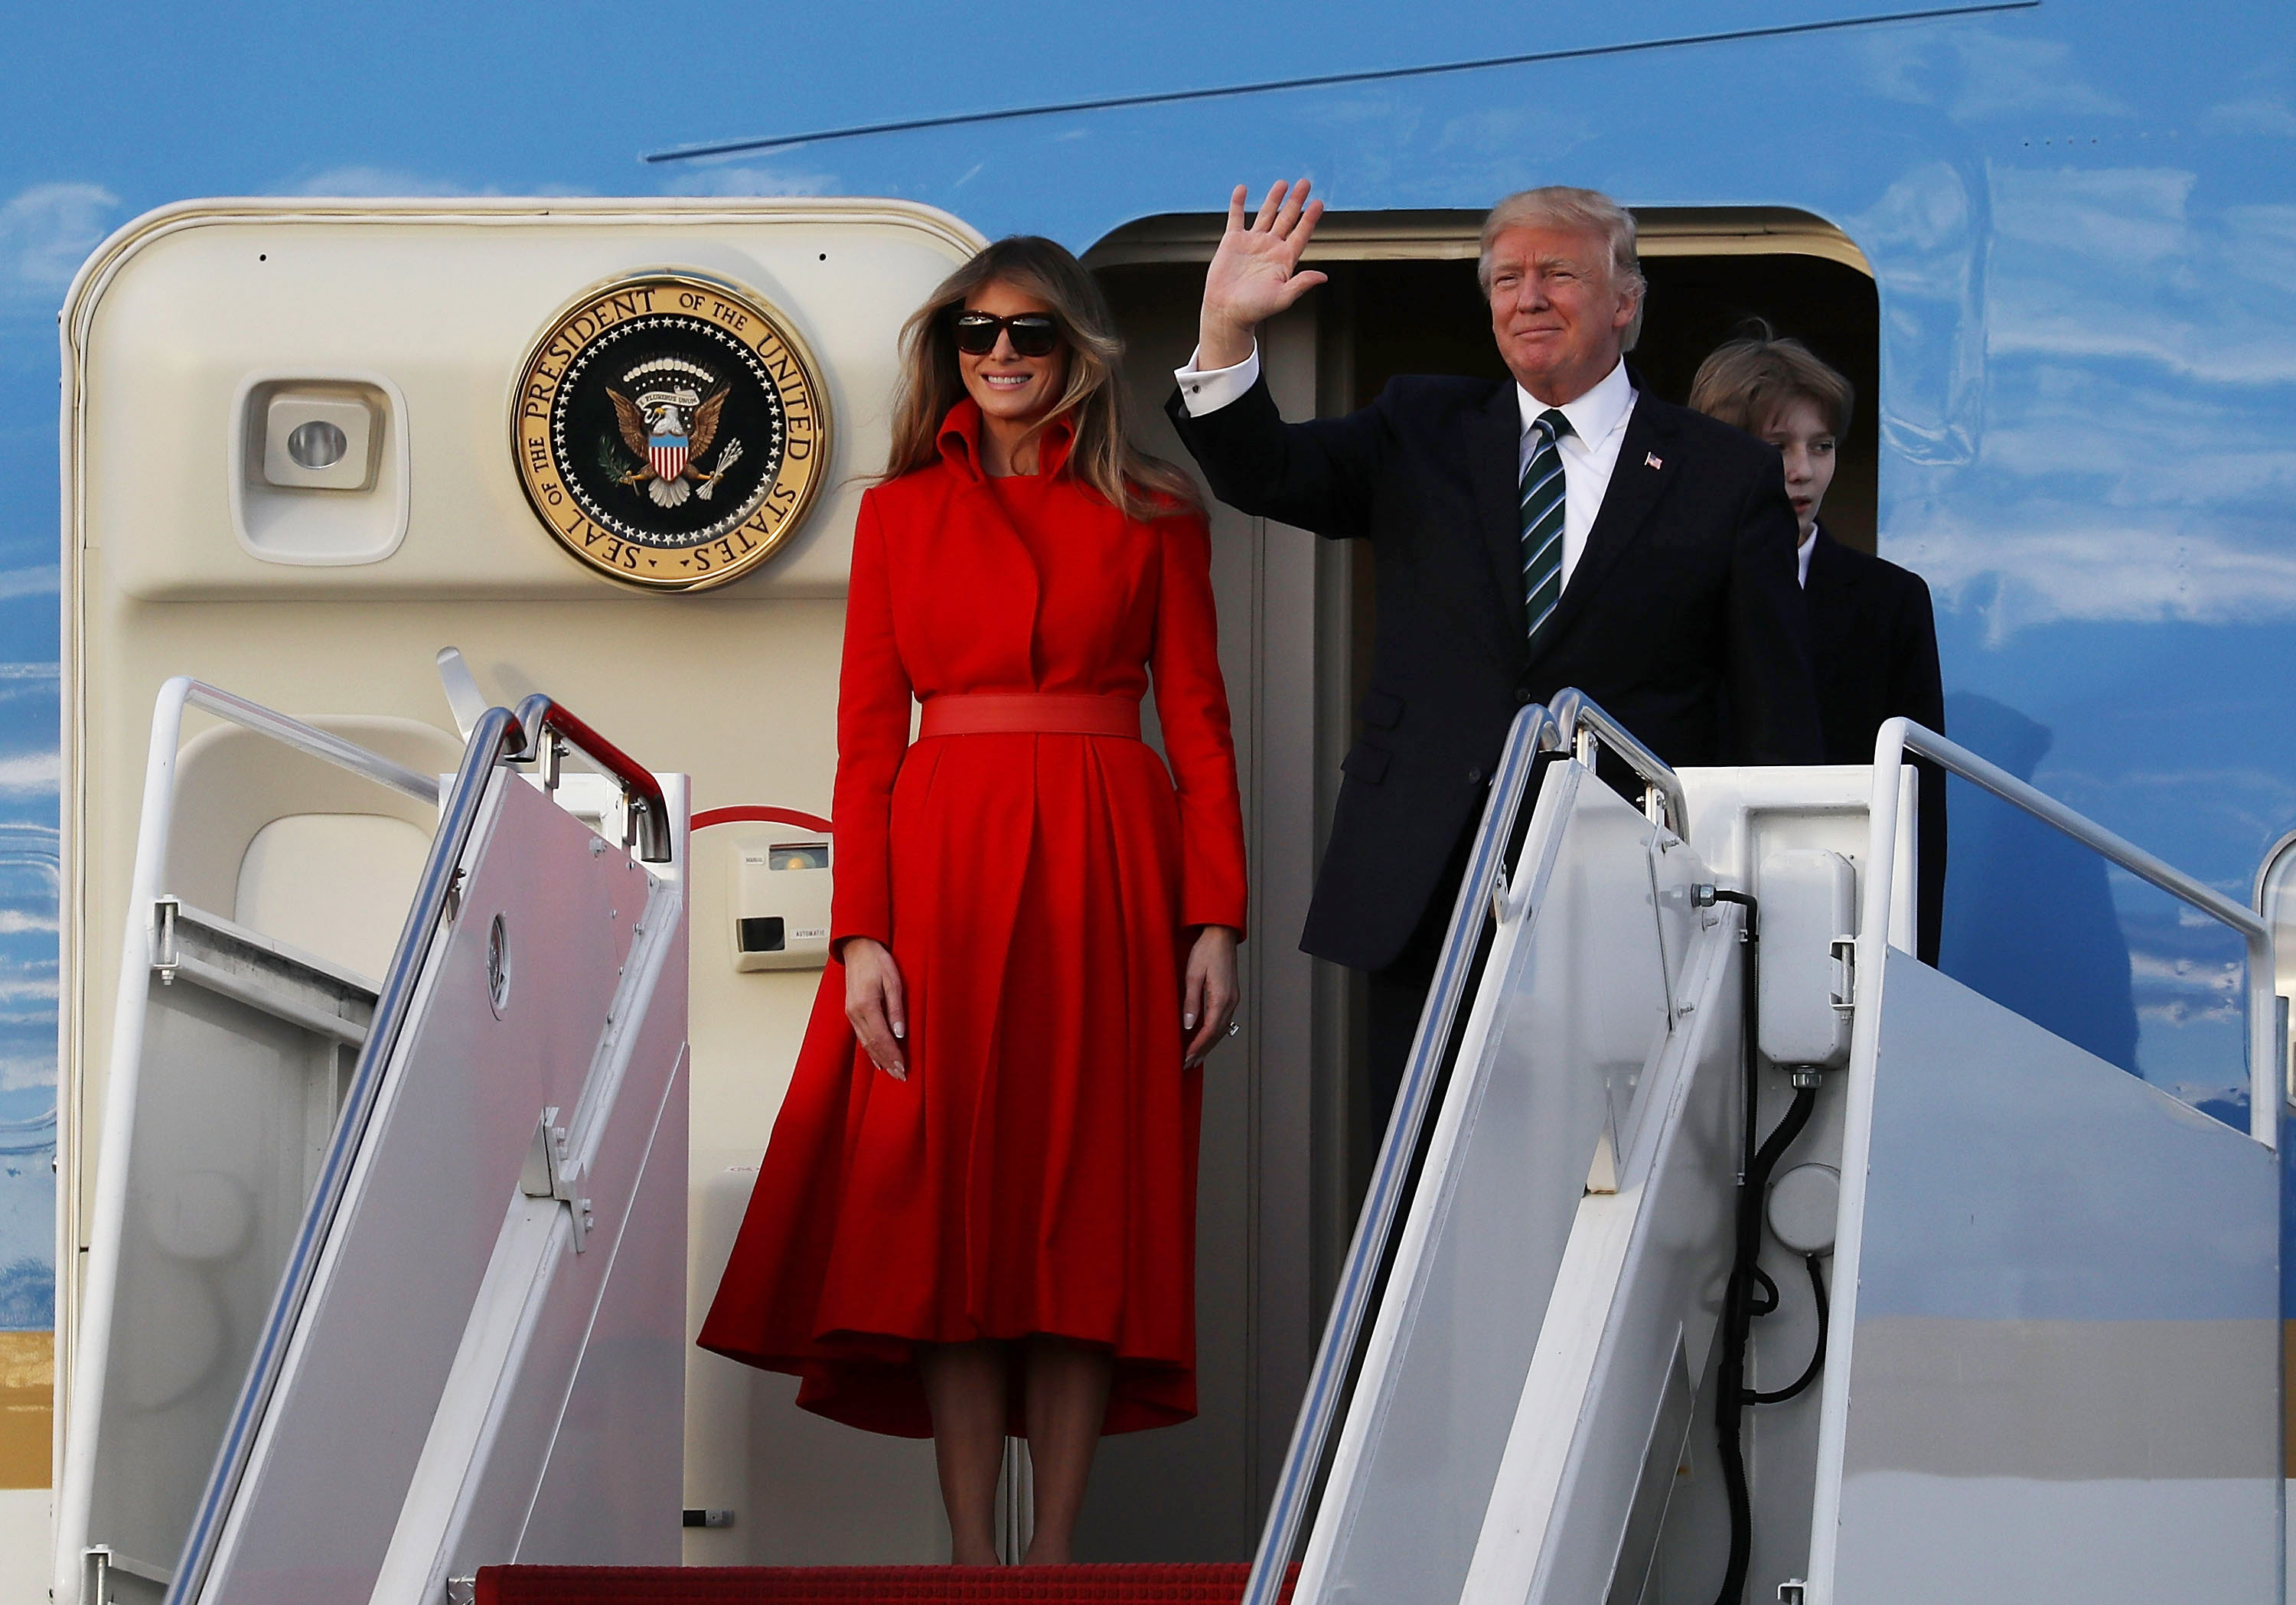 President Donald Trump, his wife Melania Trump and their son Barron Trump arrive together on Air Force One at the Palm Beach International Airport to spend part of the weekend at Mar-a-Lago resort on March 17, 2017 in West Palm Beach, Florida. Joe Raedle&mdash;Getty Images (Joe Raedle&mdash;Getty Images)